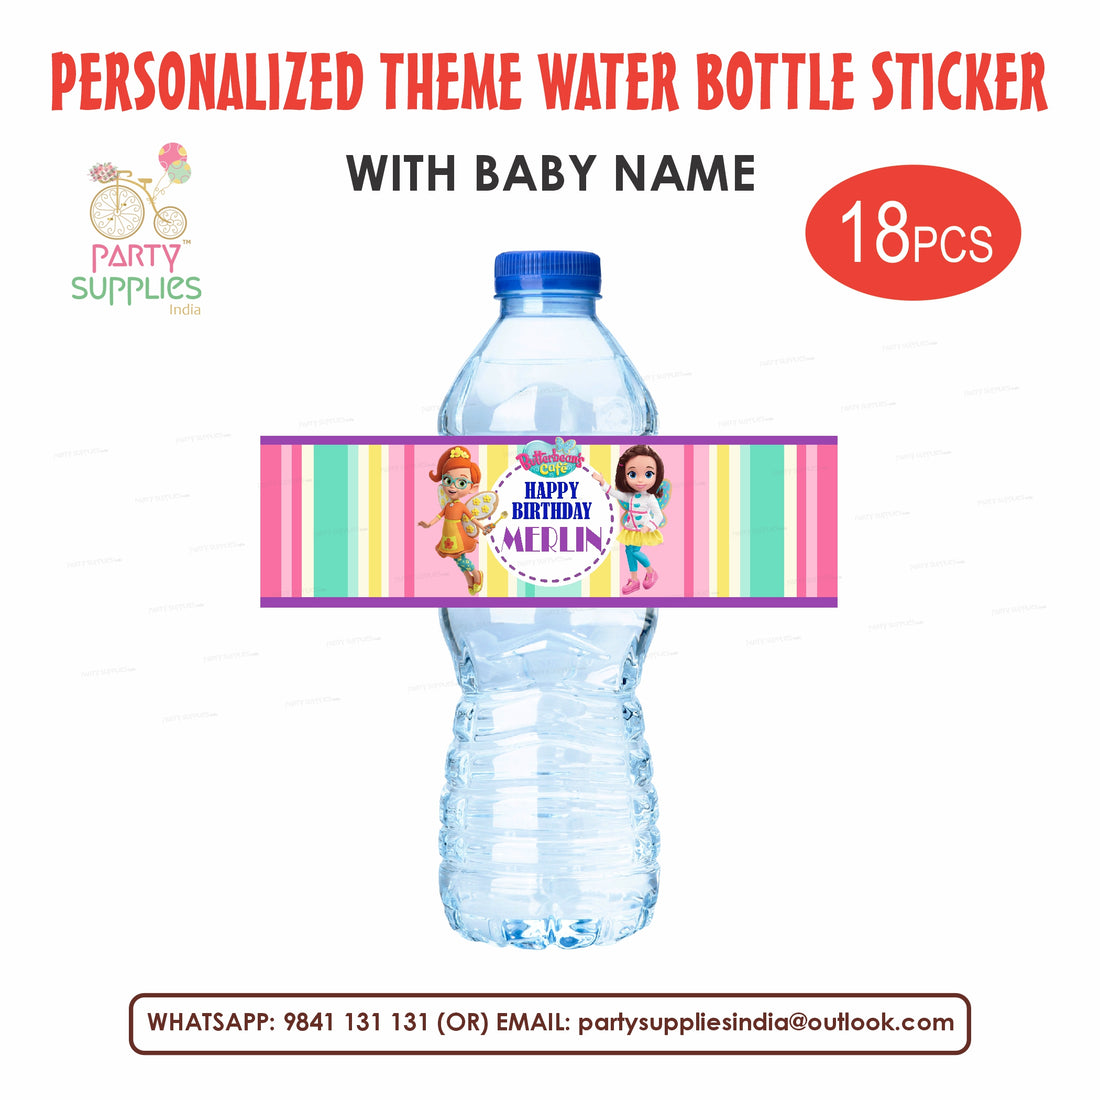 PSI Butter Beans Theme Water Bottle Stickers